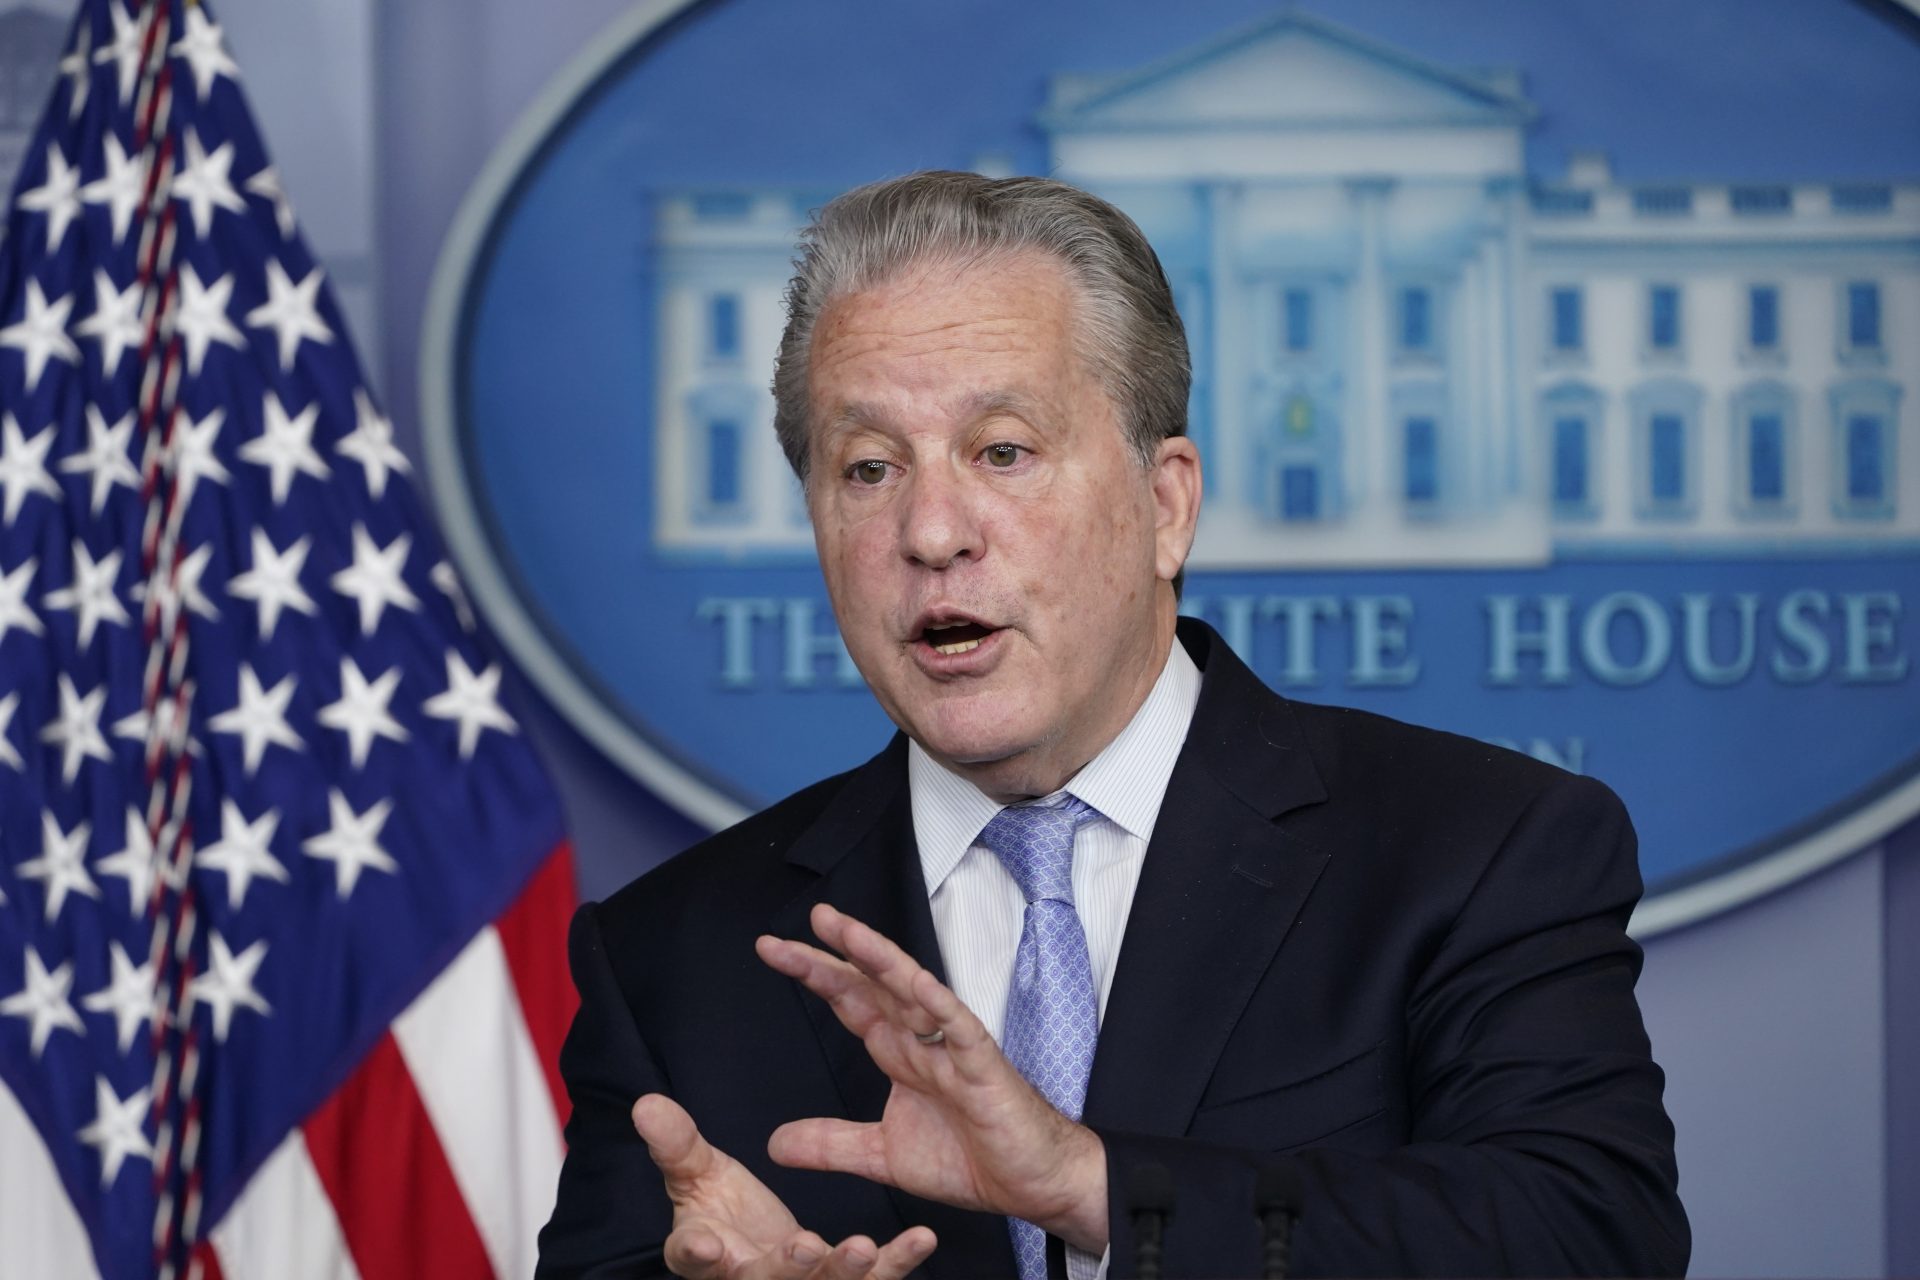 Gene Sperling, who leads the oversight for distributing funds from President Joe Biden's $1.9 trillion coronavirus rescue package, speaks during the daily briefing at the White House in Washington, on Aug. 2, 2021.